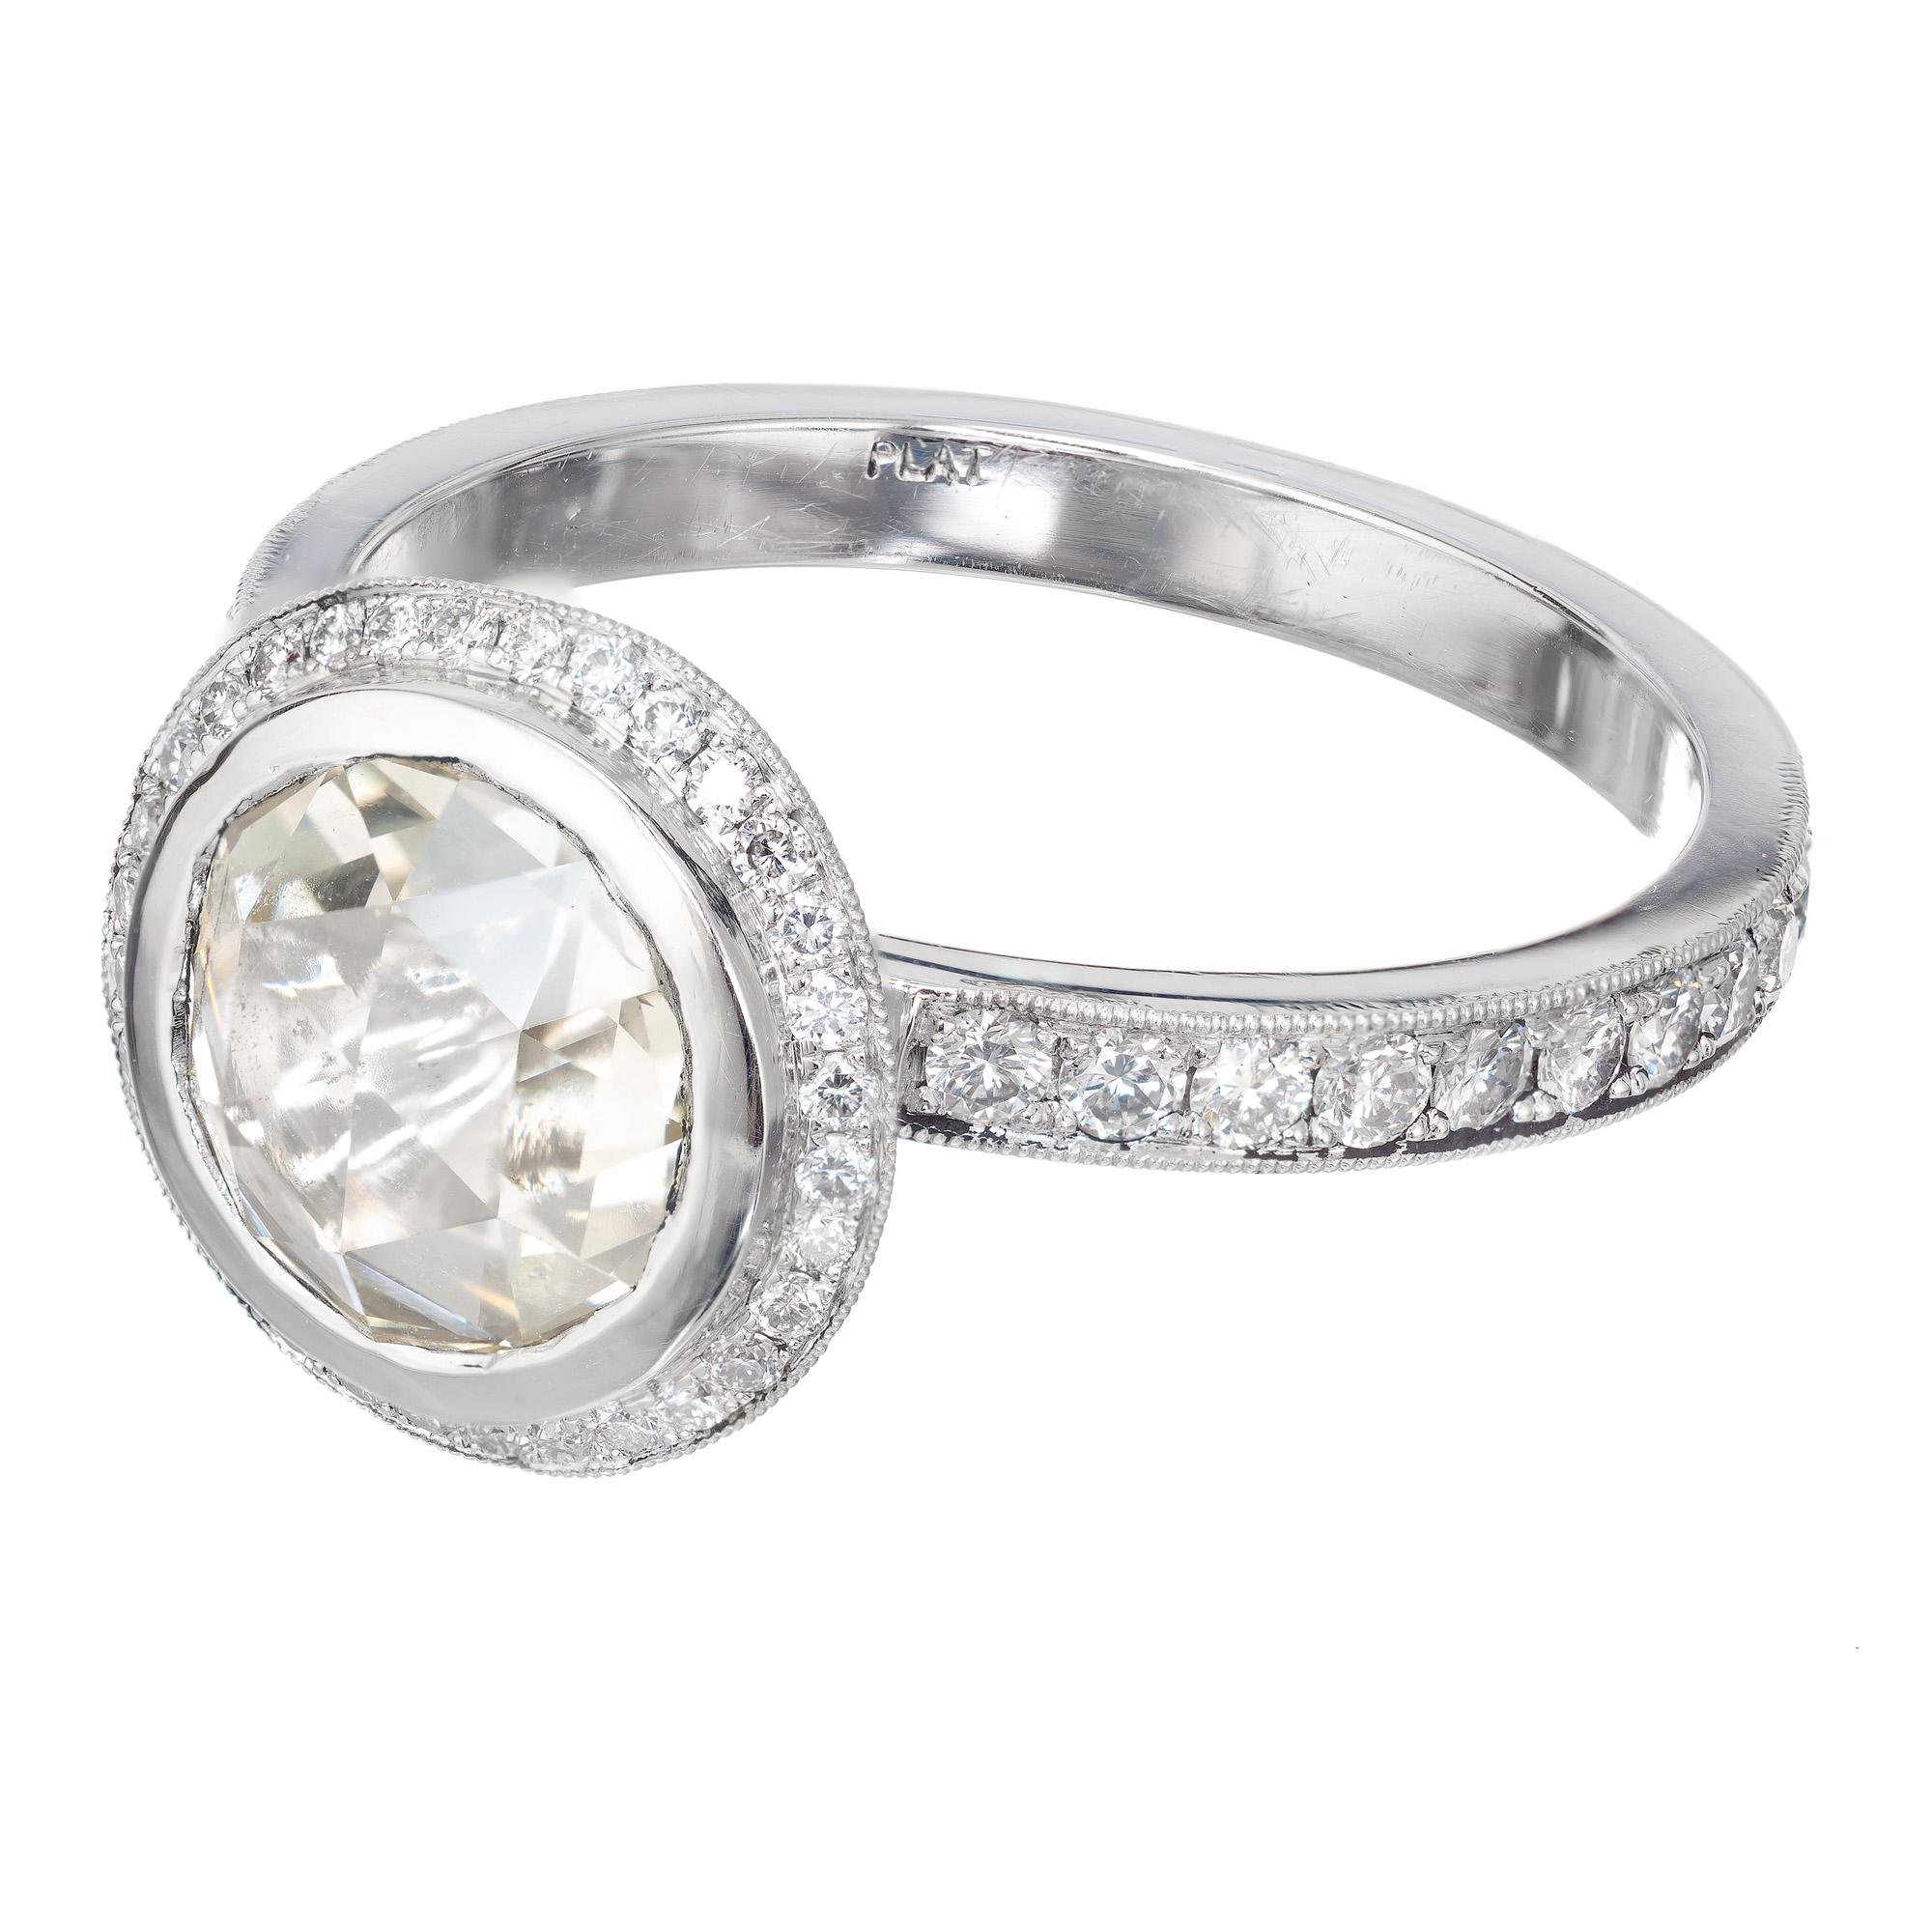 Original rose cut 1.46ct diamond halo engagement ring. The center stone is GIA certified with a warm soft light-yellow tint, surrounded by a halo of round diamonds in a platinum setting created in the Peter Suchy Workshop. Made to fit a wedding band